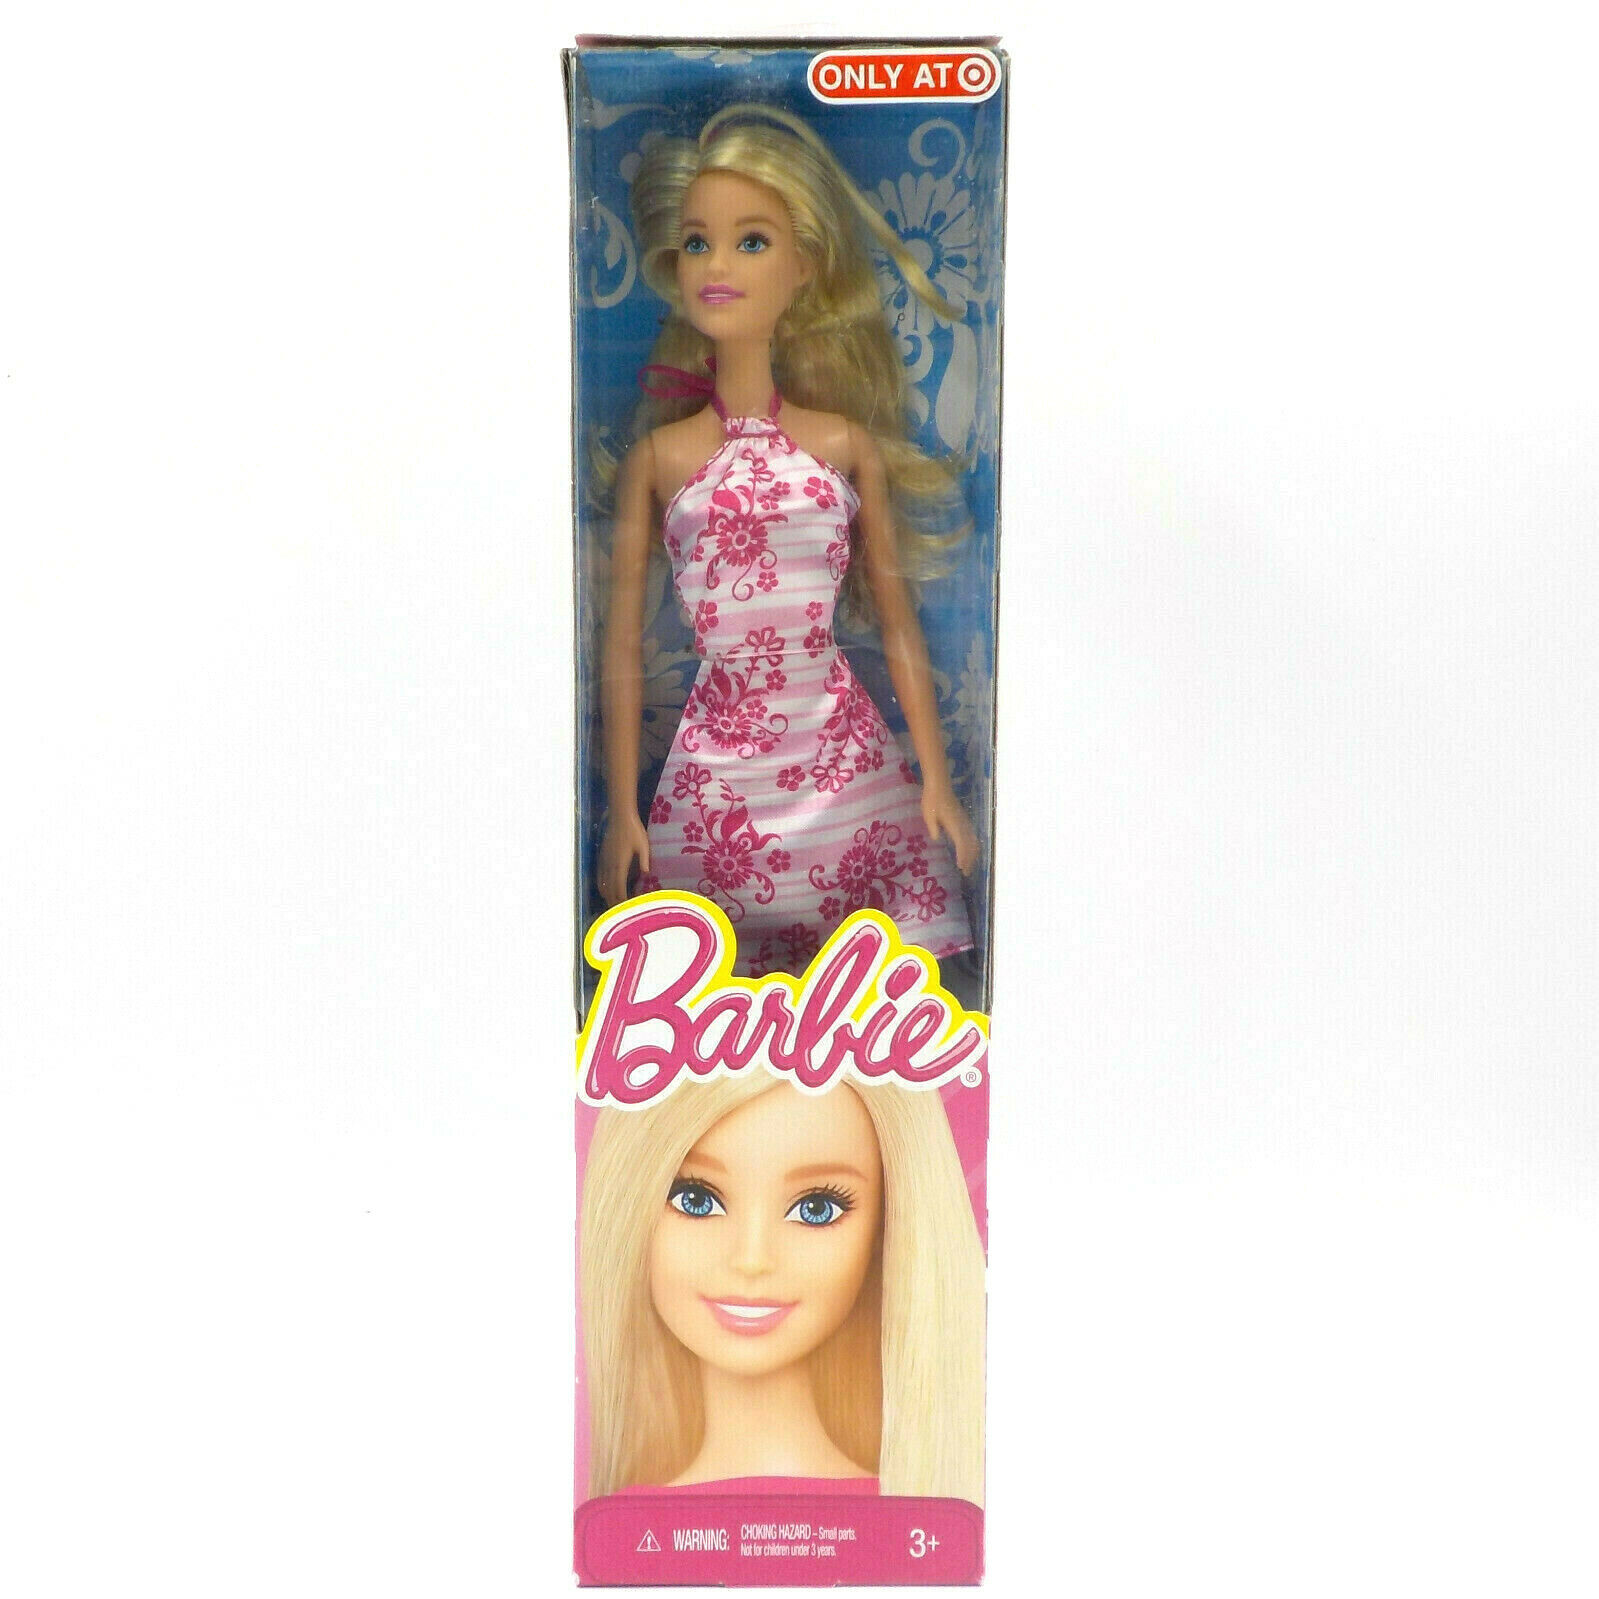 Barbie Doll W/ Pink Floral Dress, 12" Mattel 2014 Target Holiday Exclusive